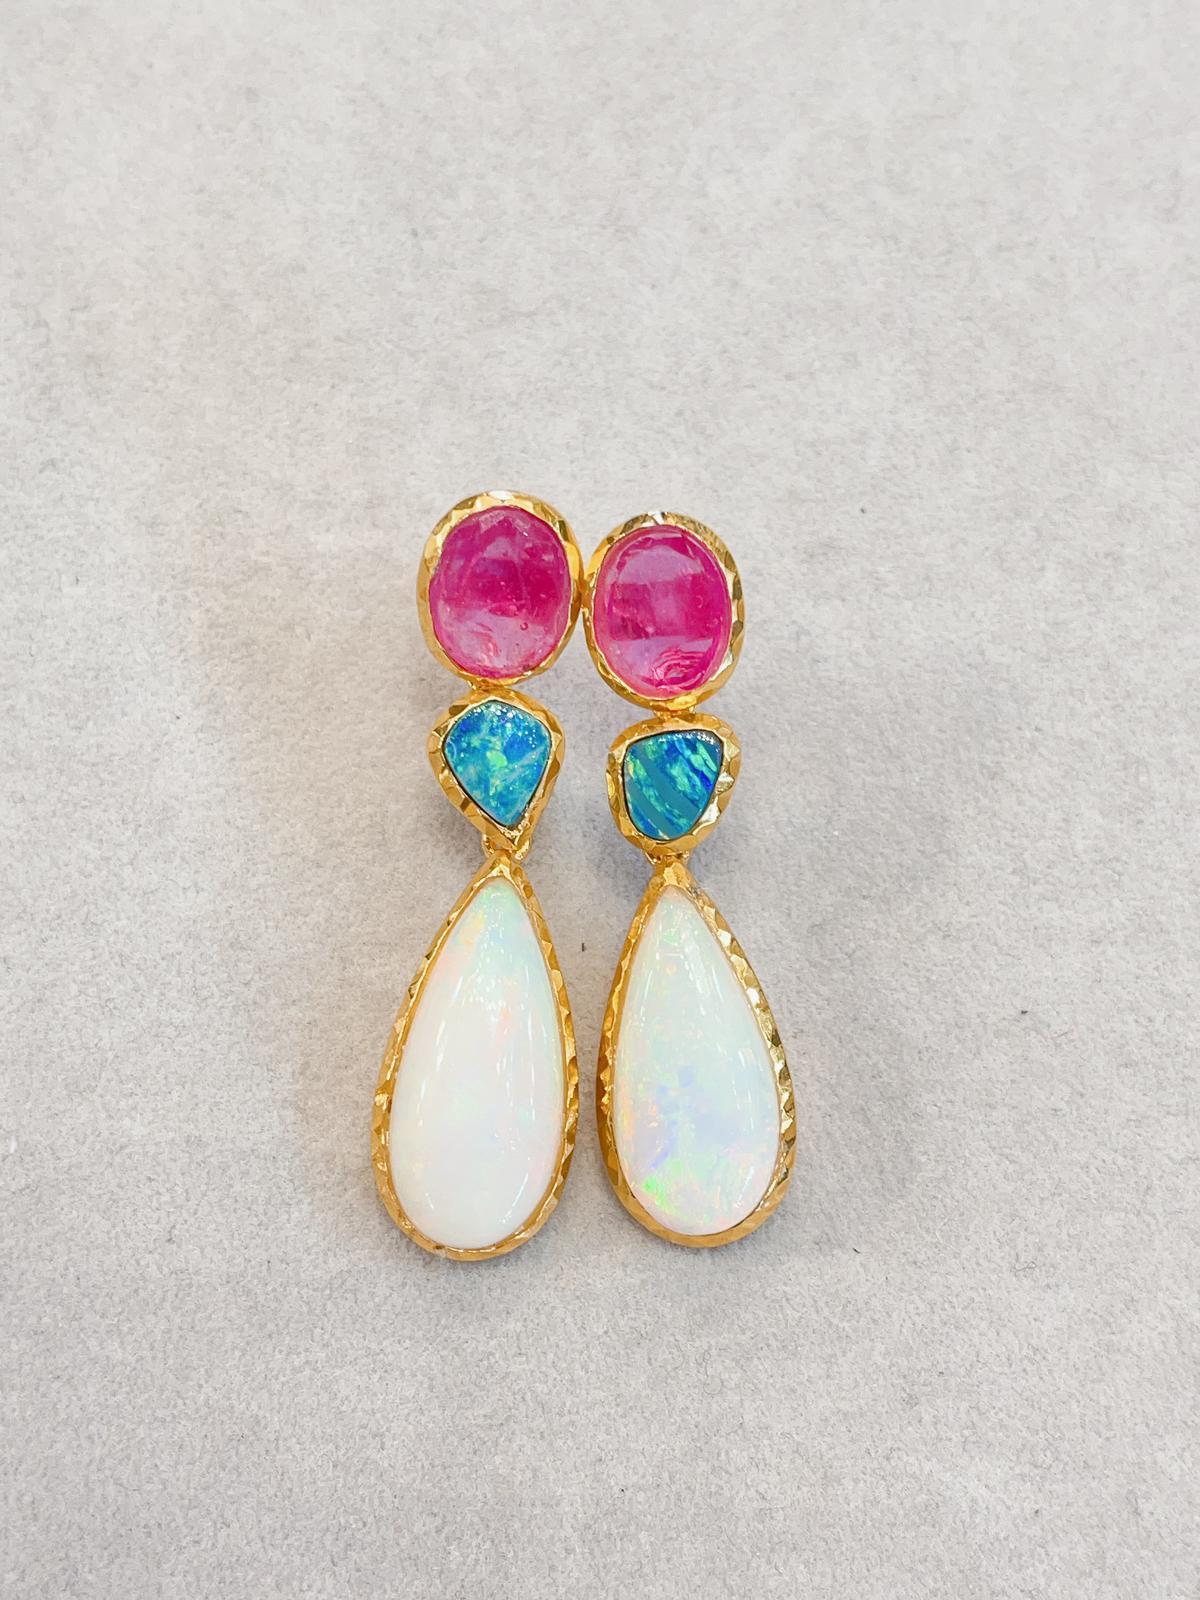 Bochic “Capri” Multi Natural Gem Earrings 
Set in 22K Gold and Silver 
Natural Ruby, Colors - Red, Pink - 7 Carats 
Shape - Oval Shape
Ethiopian White Opal and Australian Blue Opal - 8 Carats 
Blue opals shape - natural 
White opal shape - tear